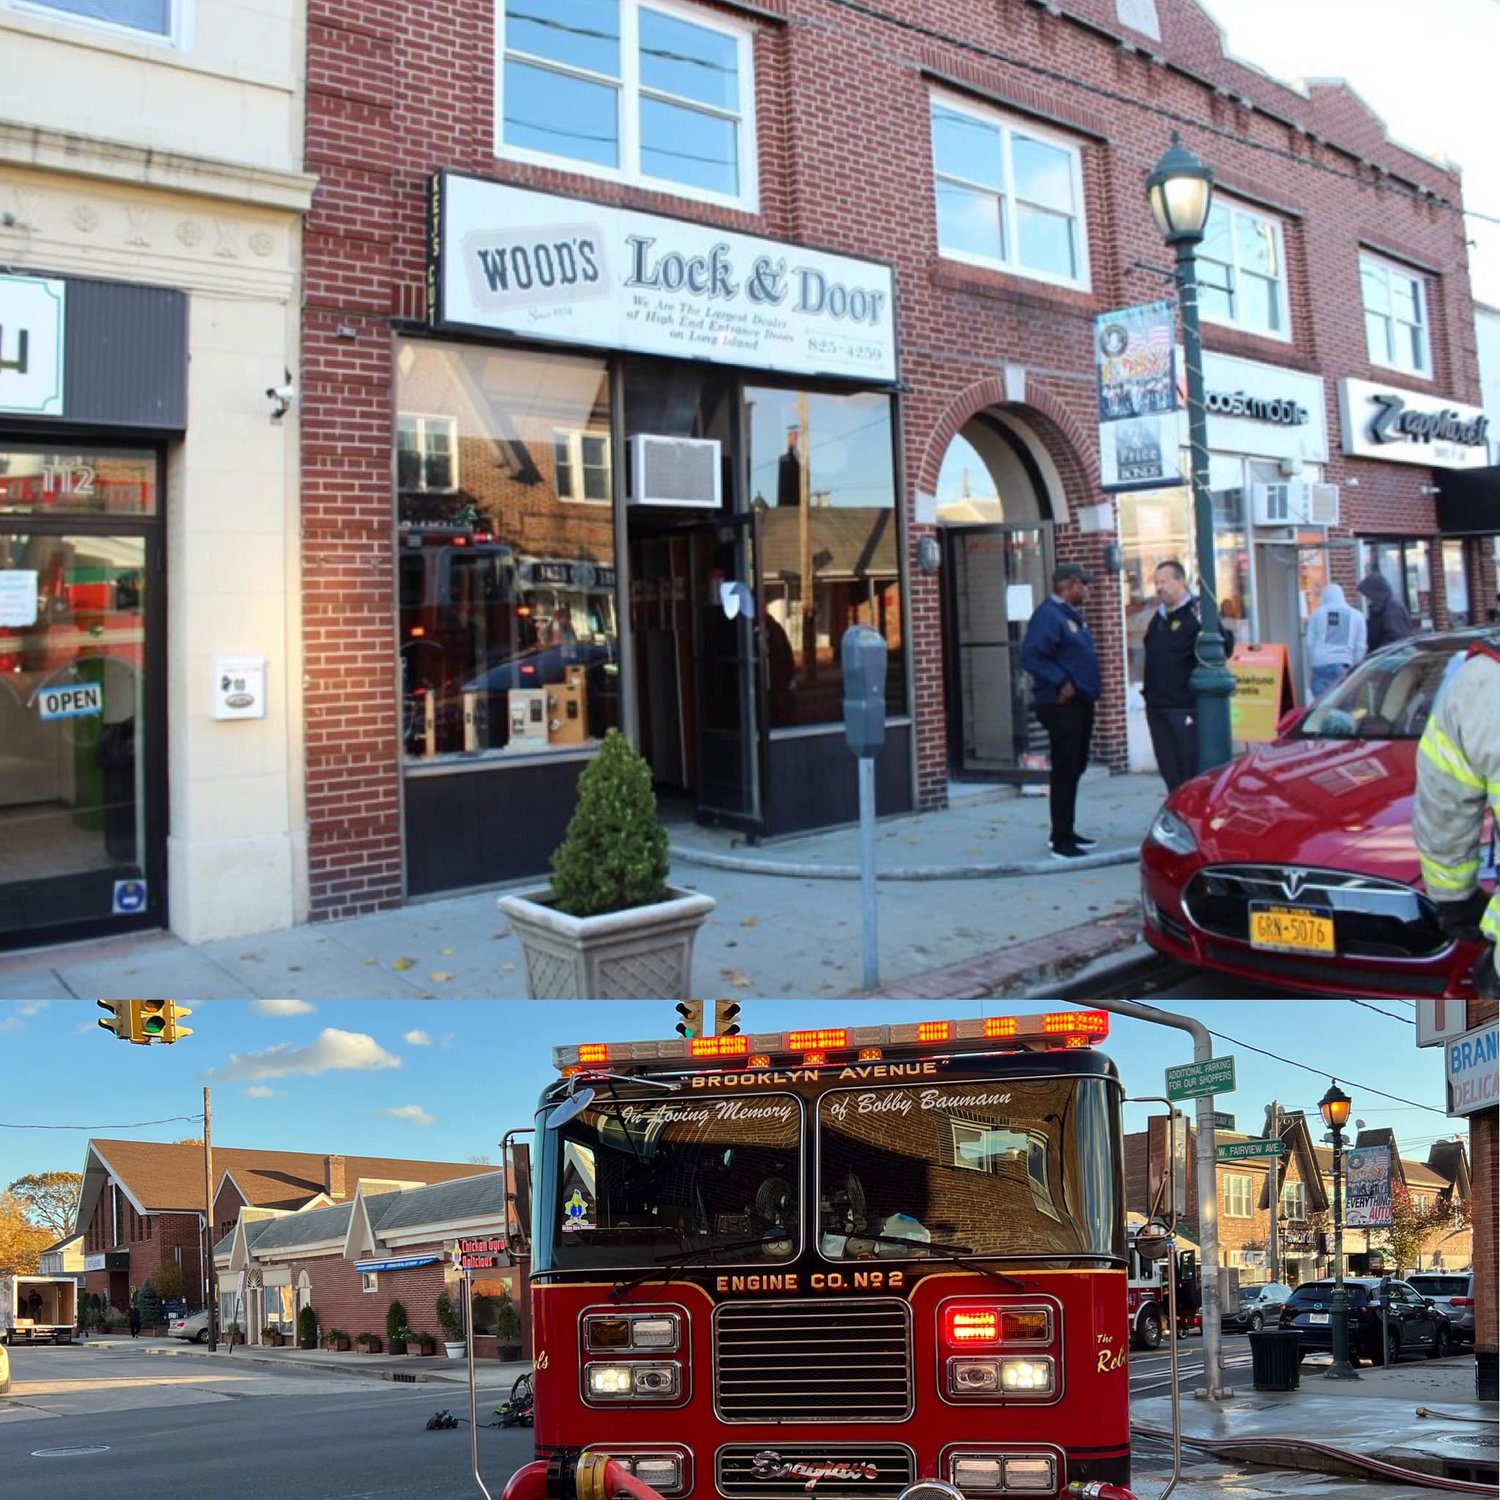 Multiple fire departments were present at the scene to make sure the small fire did not spread to surrounding shops.